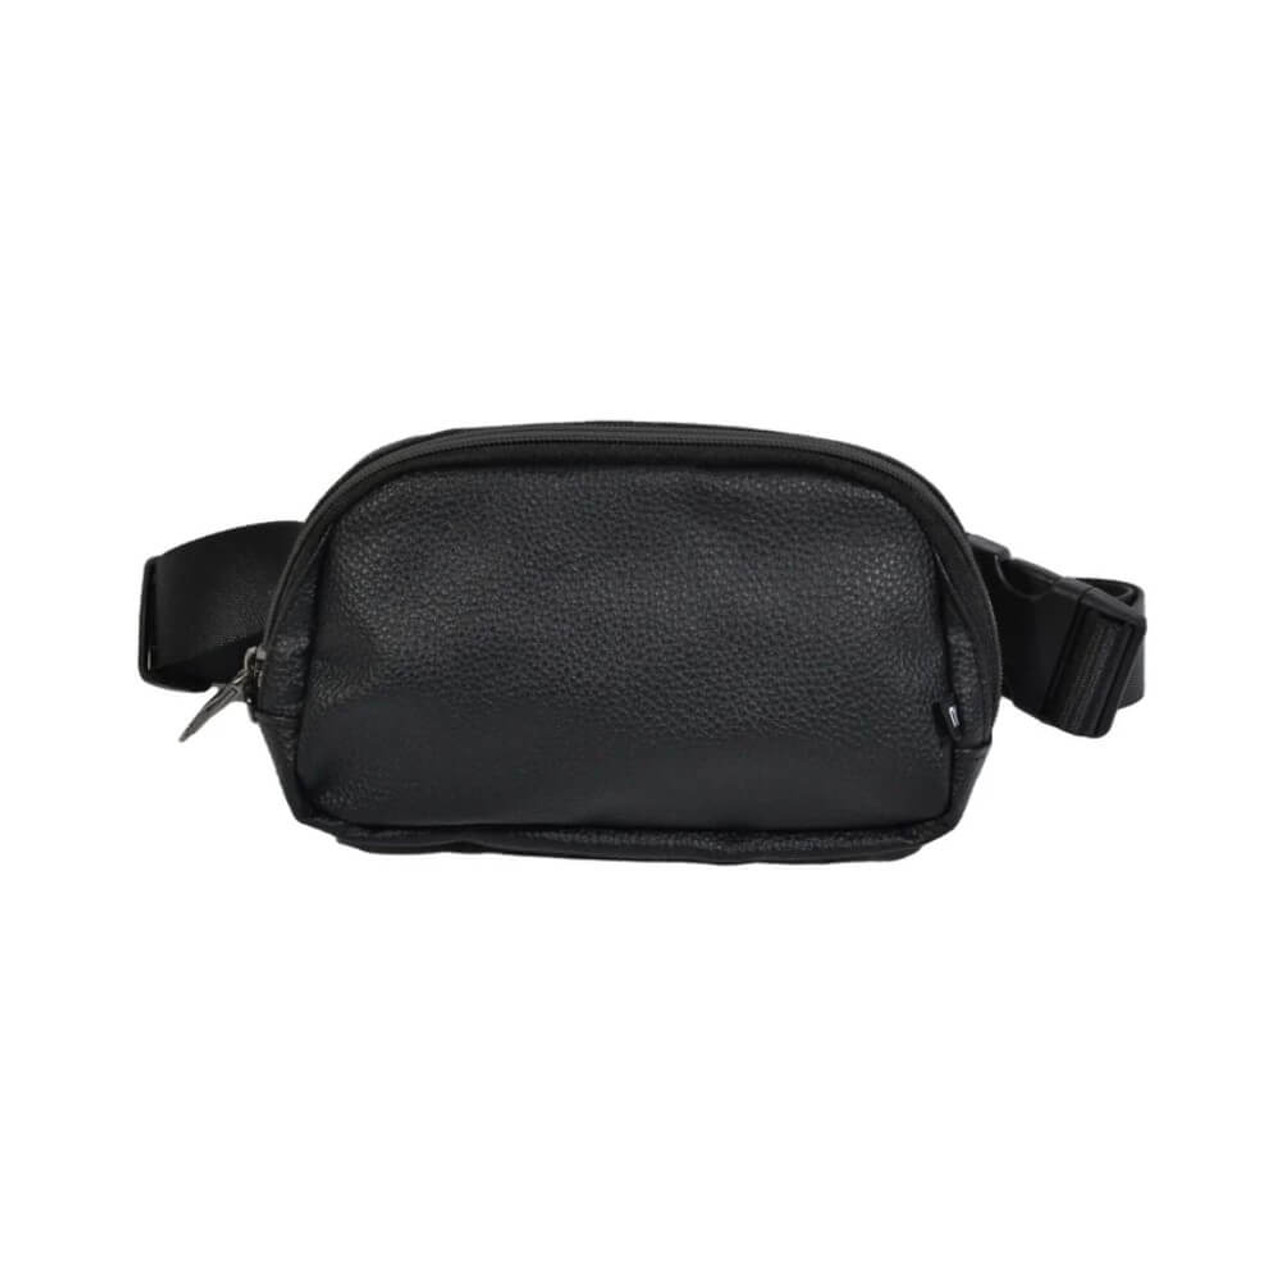 Nupouch Anti-Theft Belt Bag Milan Leather Black